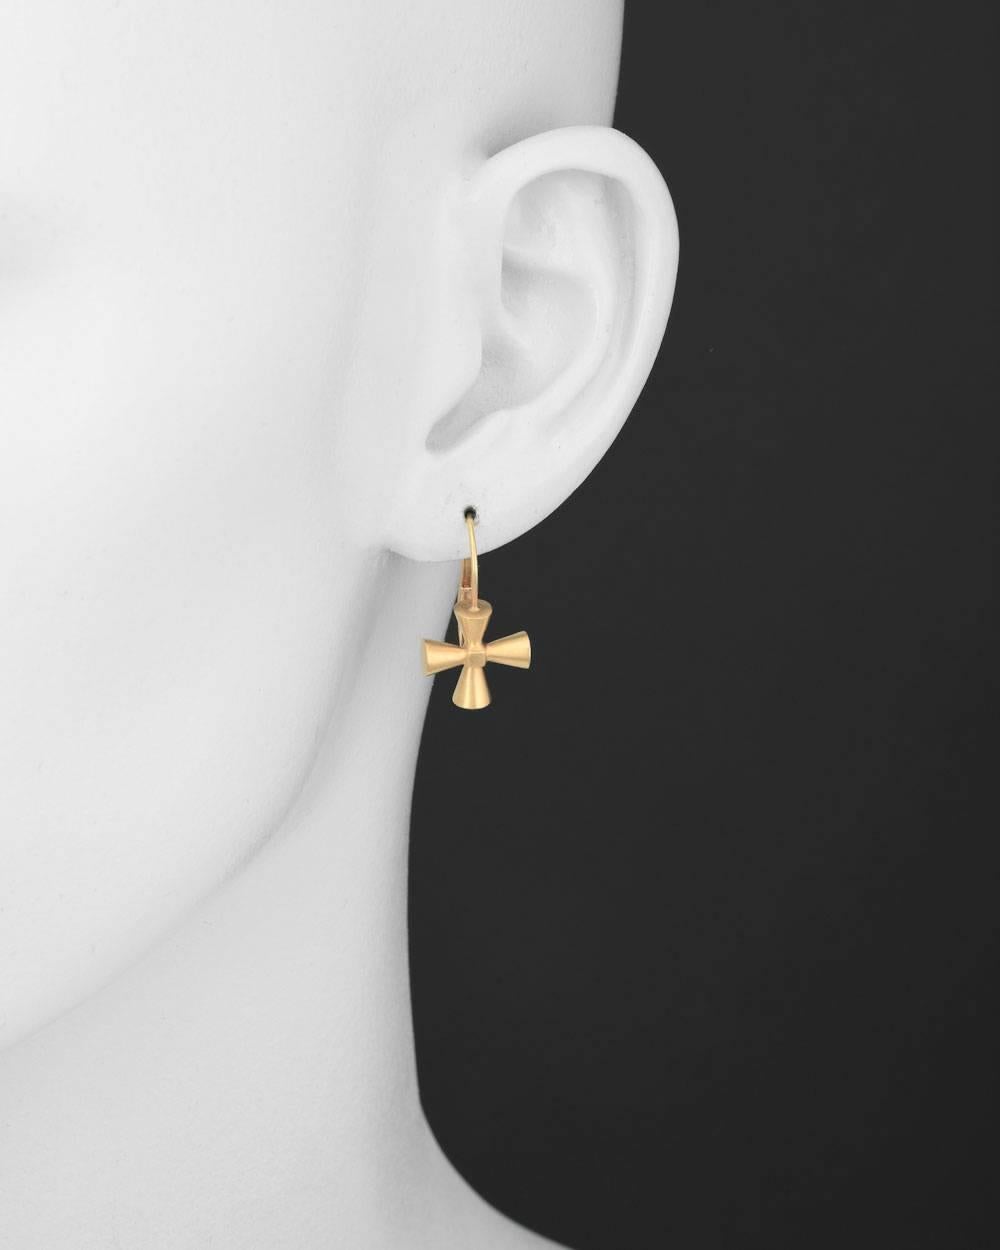 Cruciform-shaped short drop earrings in 22k yellow gold, on French wires, with clips in 18k yellow gold, the cross drops measuring approximately 13mm in diameter (0.5